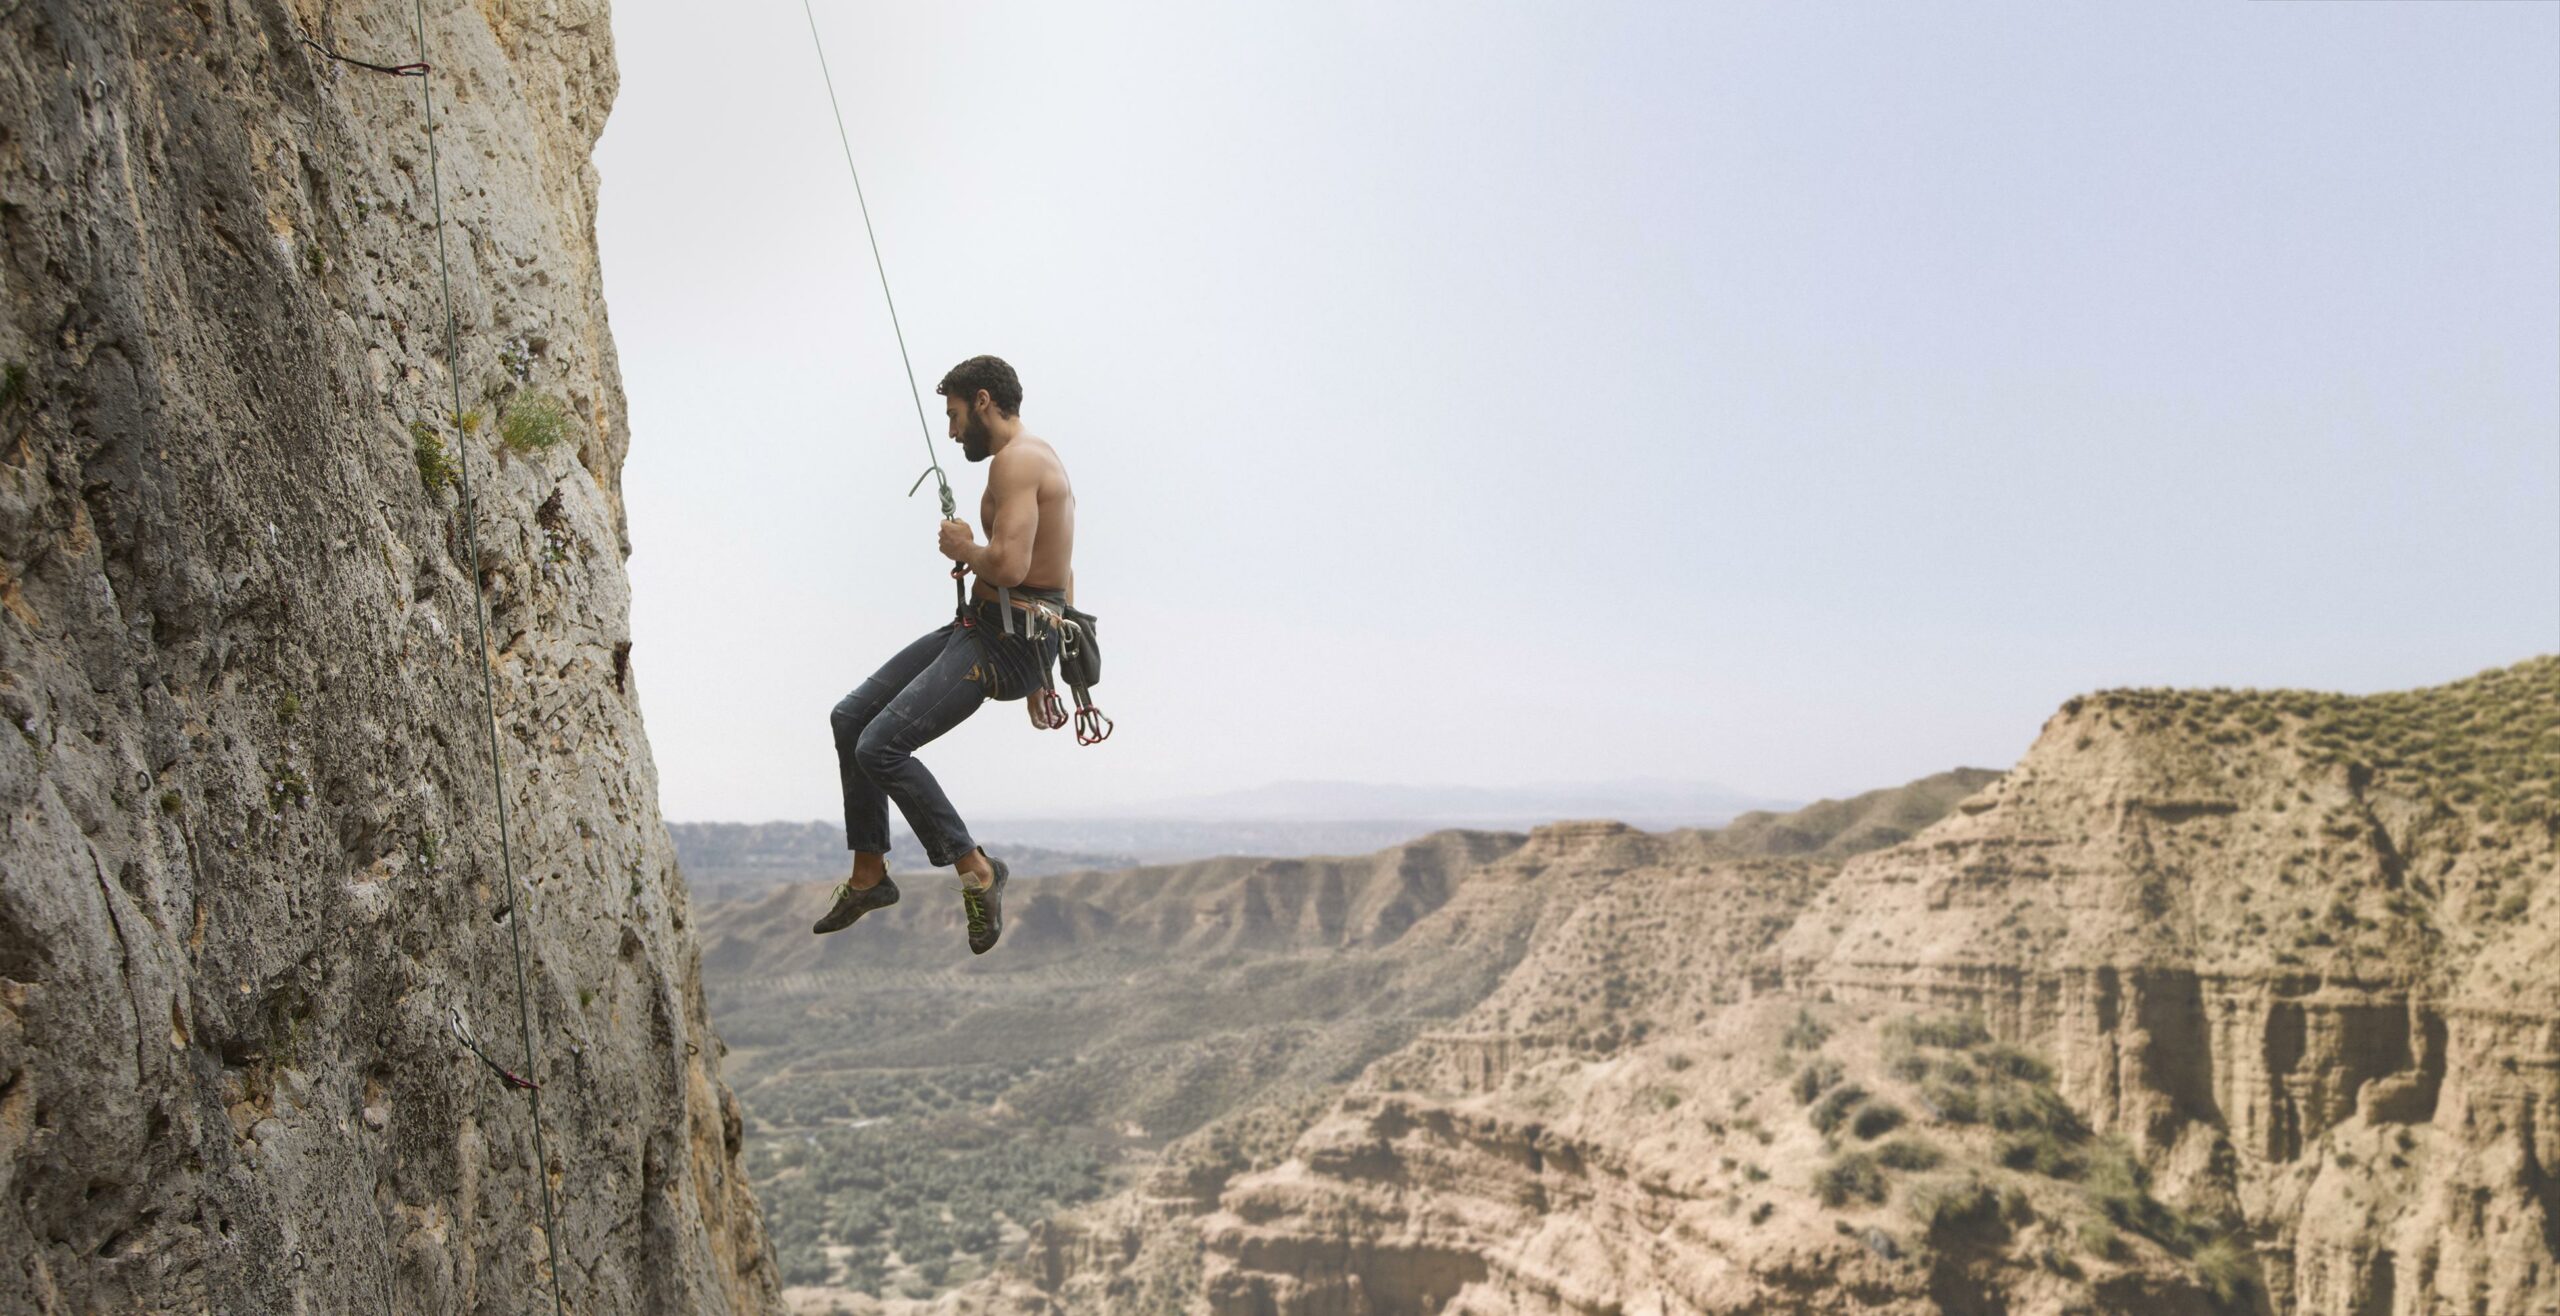 A climber rappelling with a single rope, highlighting the simplicity and lightweight benefits of this technique.